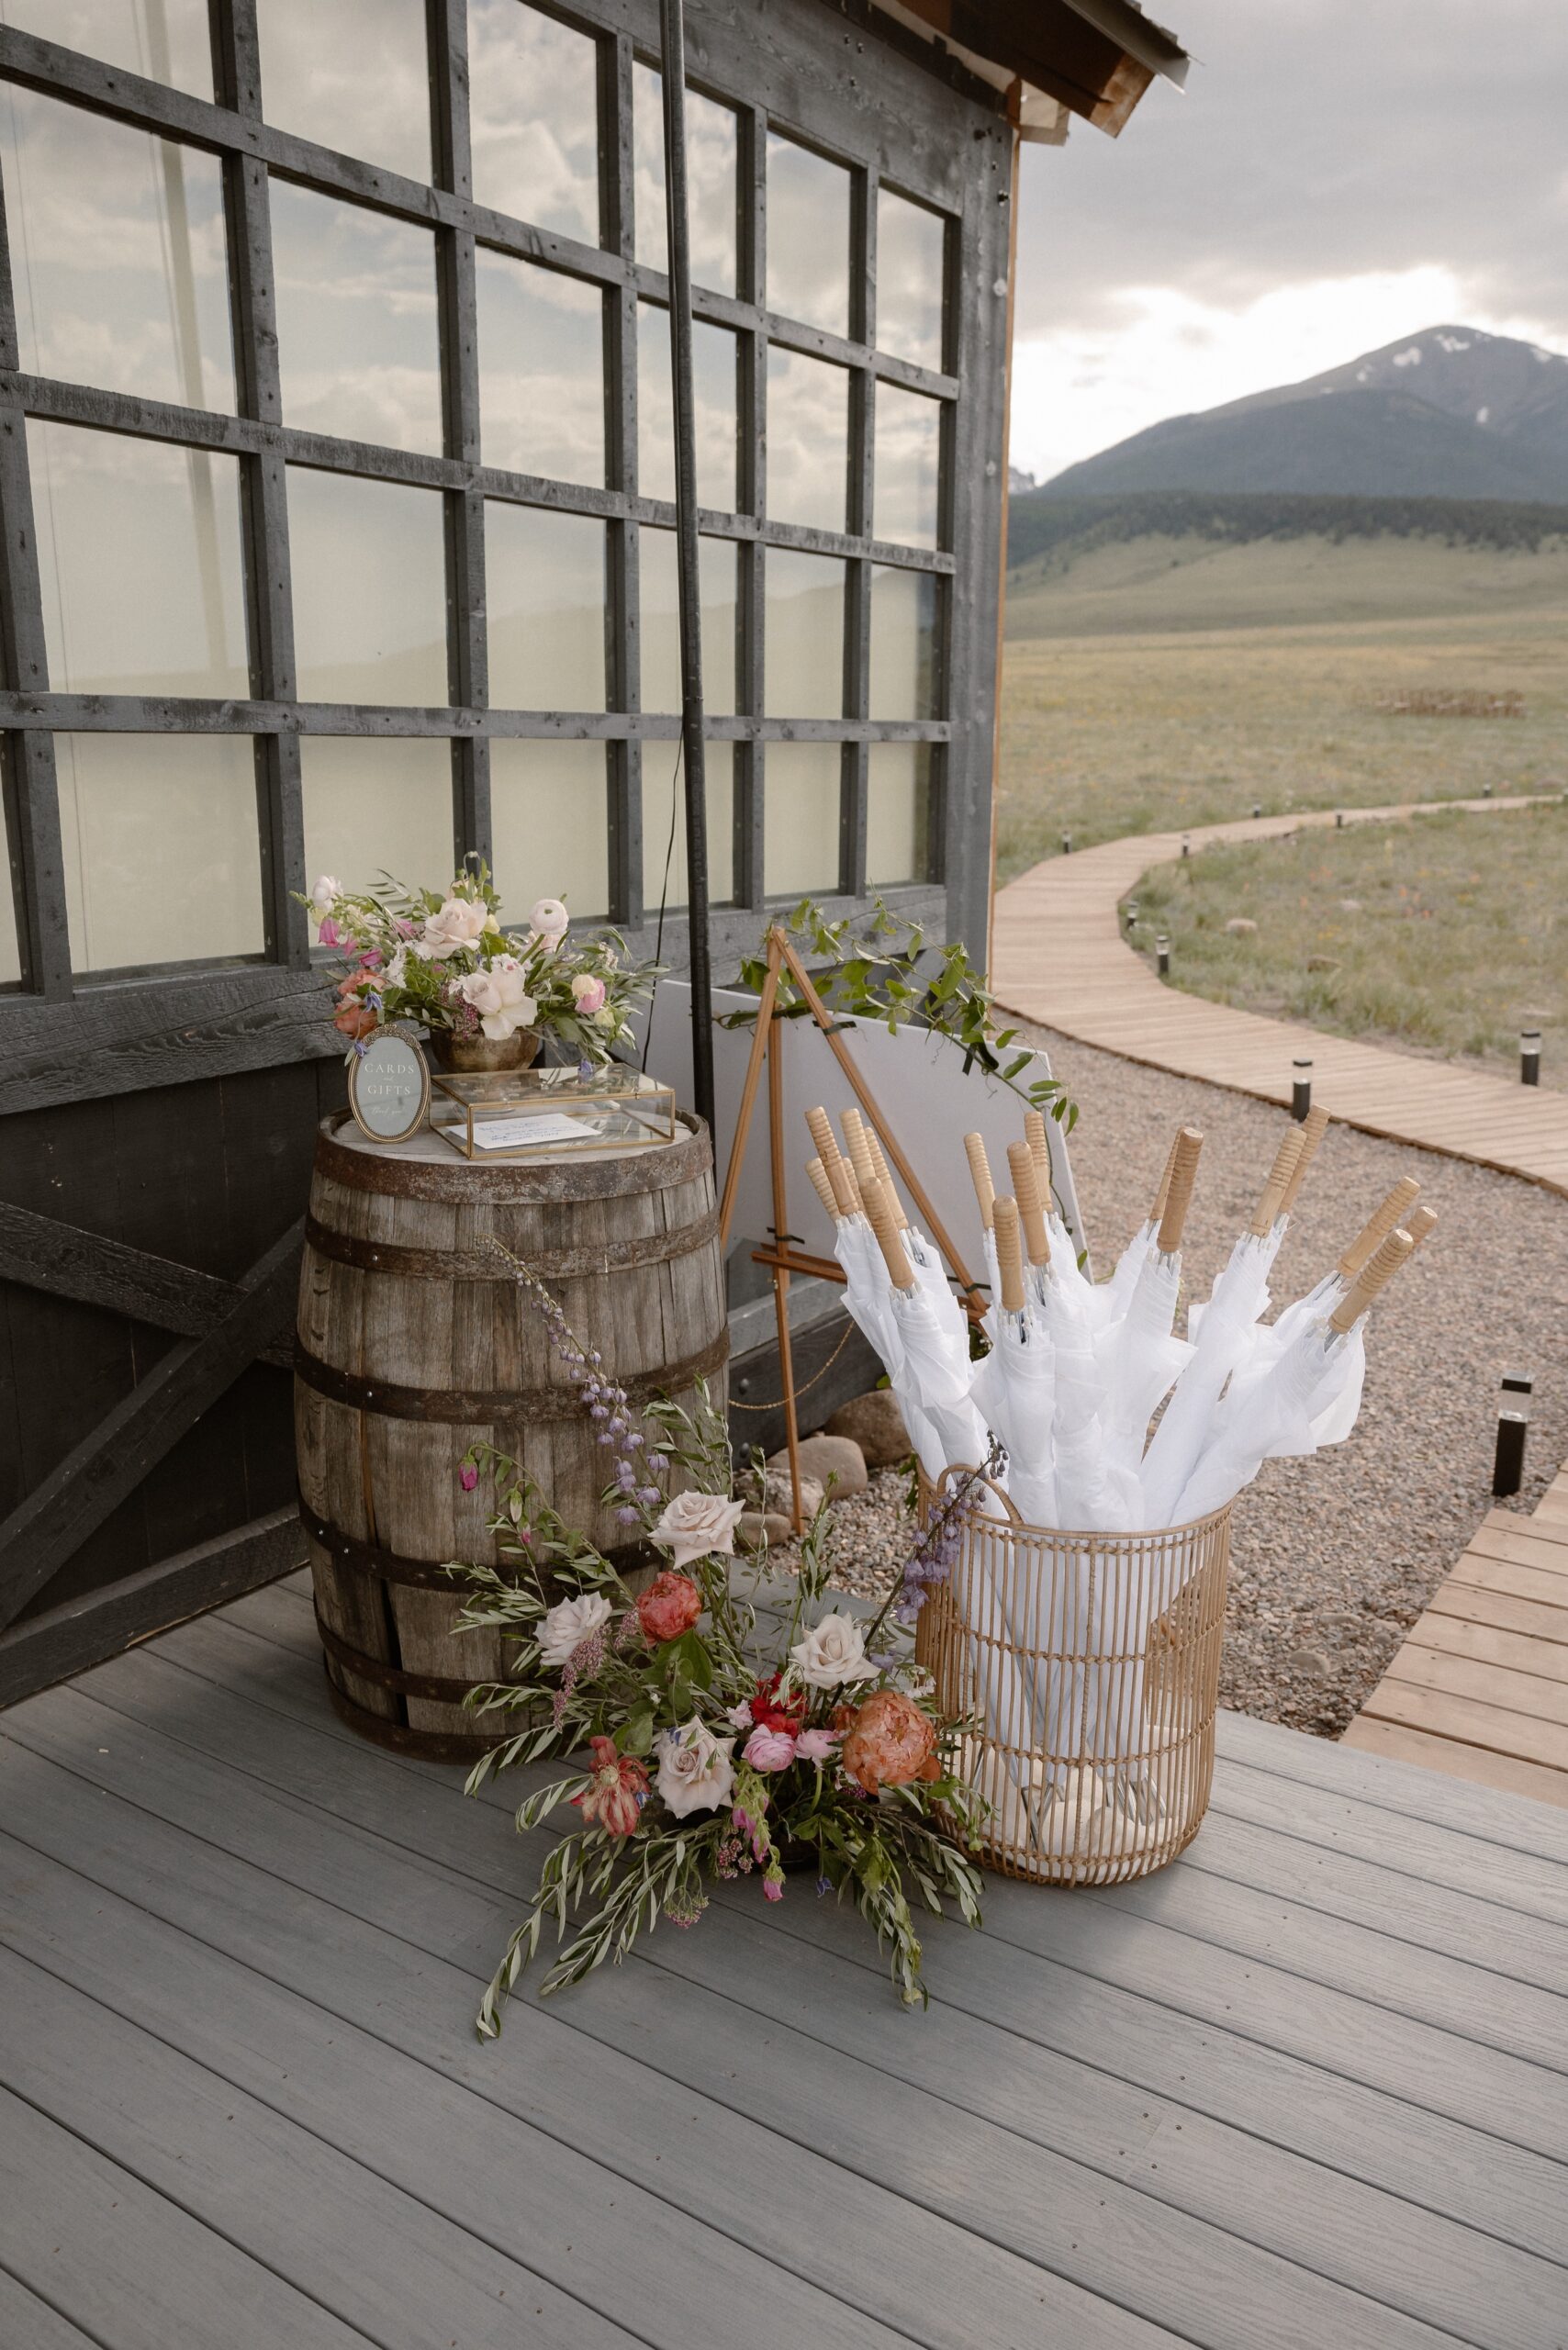 A photo of white umbrellas and other wedding guest accessories on the patio at Three Peaks Ranch. Photo by Ashley Joyce.